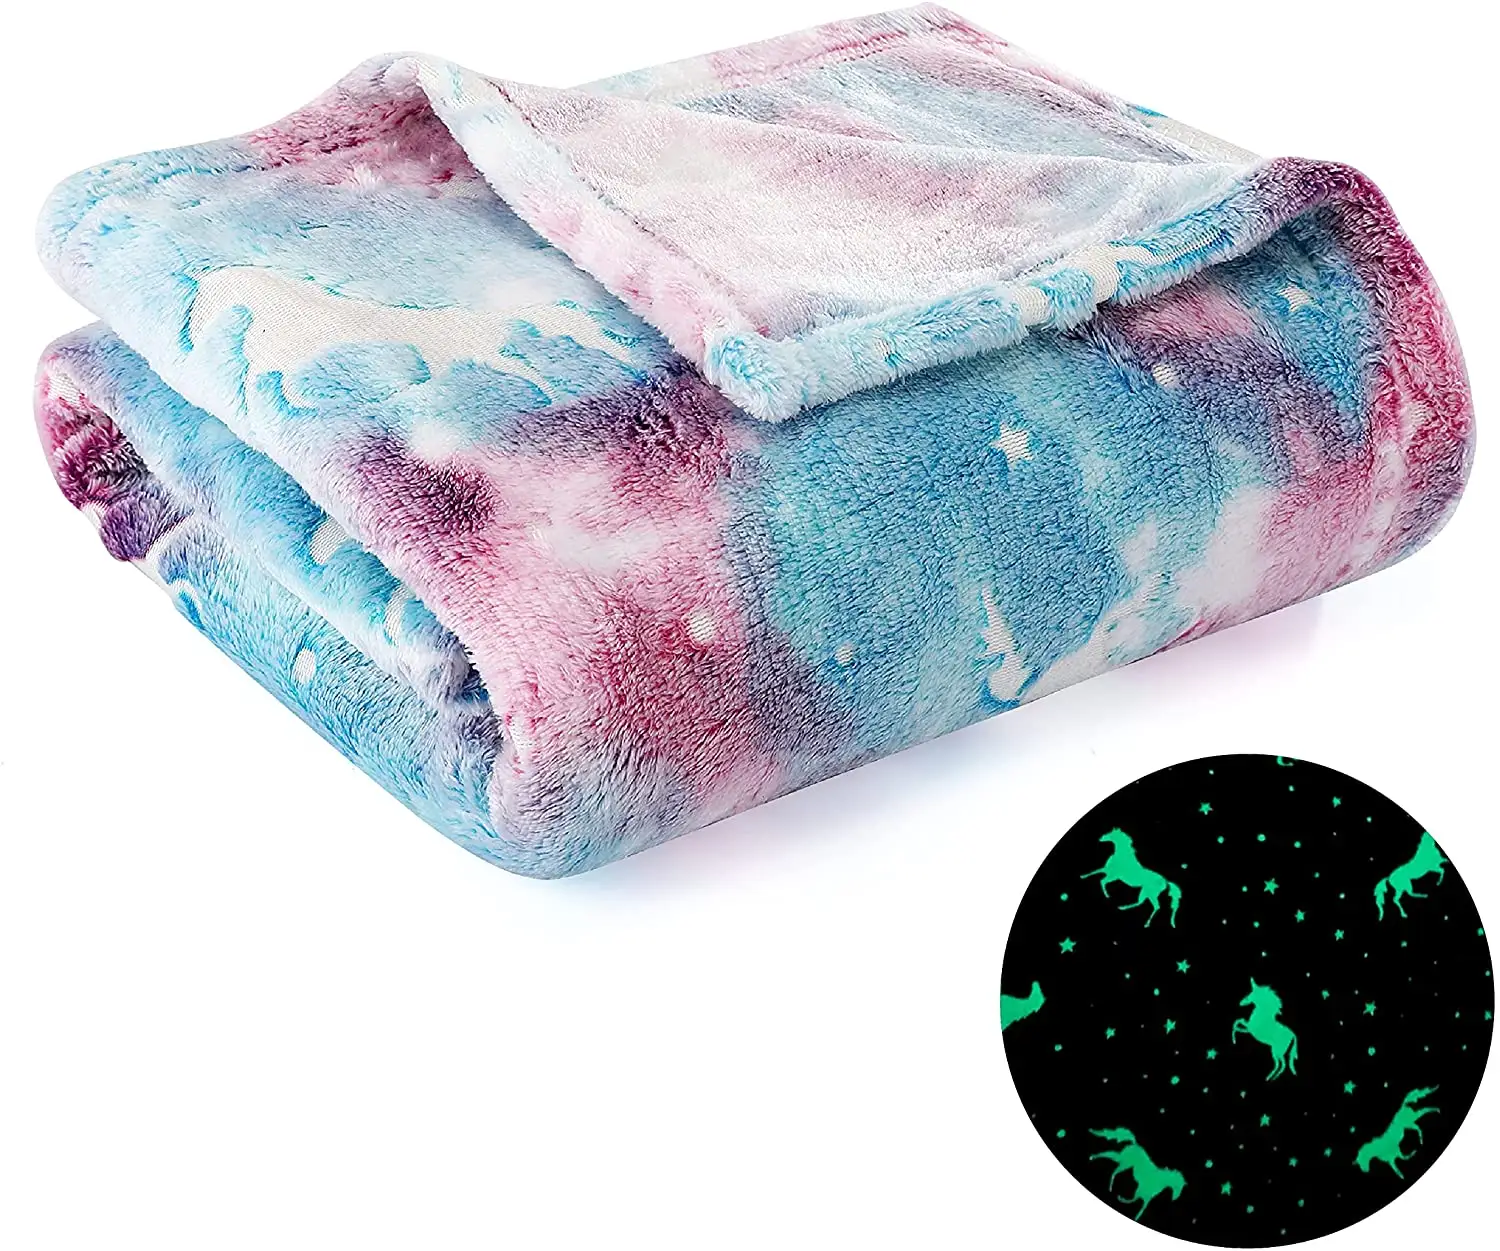 Super Soft 100% polyester flannel Colorful Mermaid Scales Glow in The Dark Throw Blanket for Baby Kids